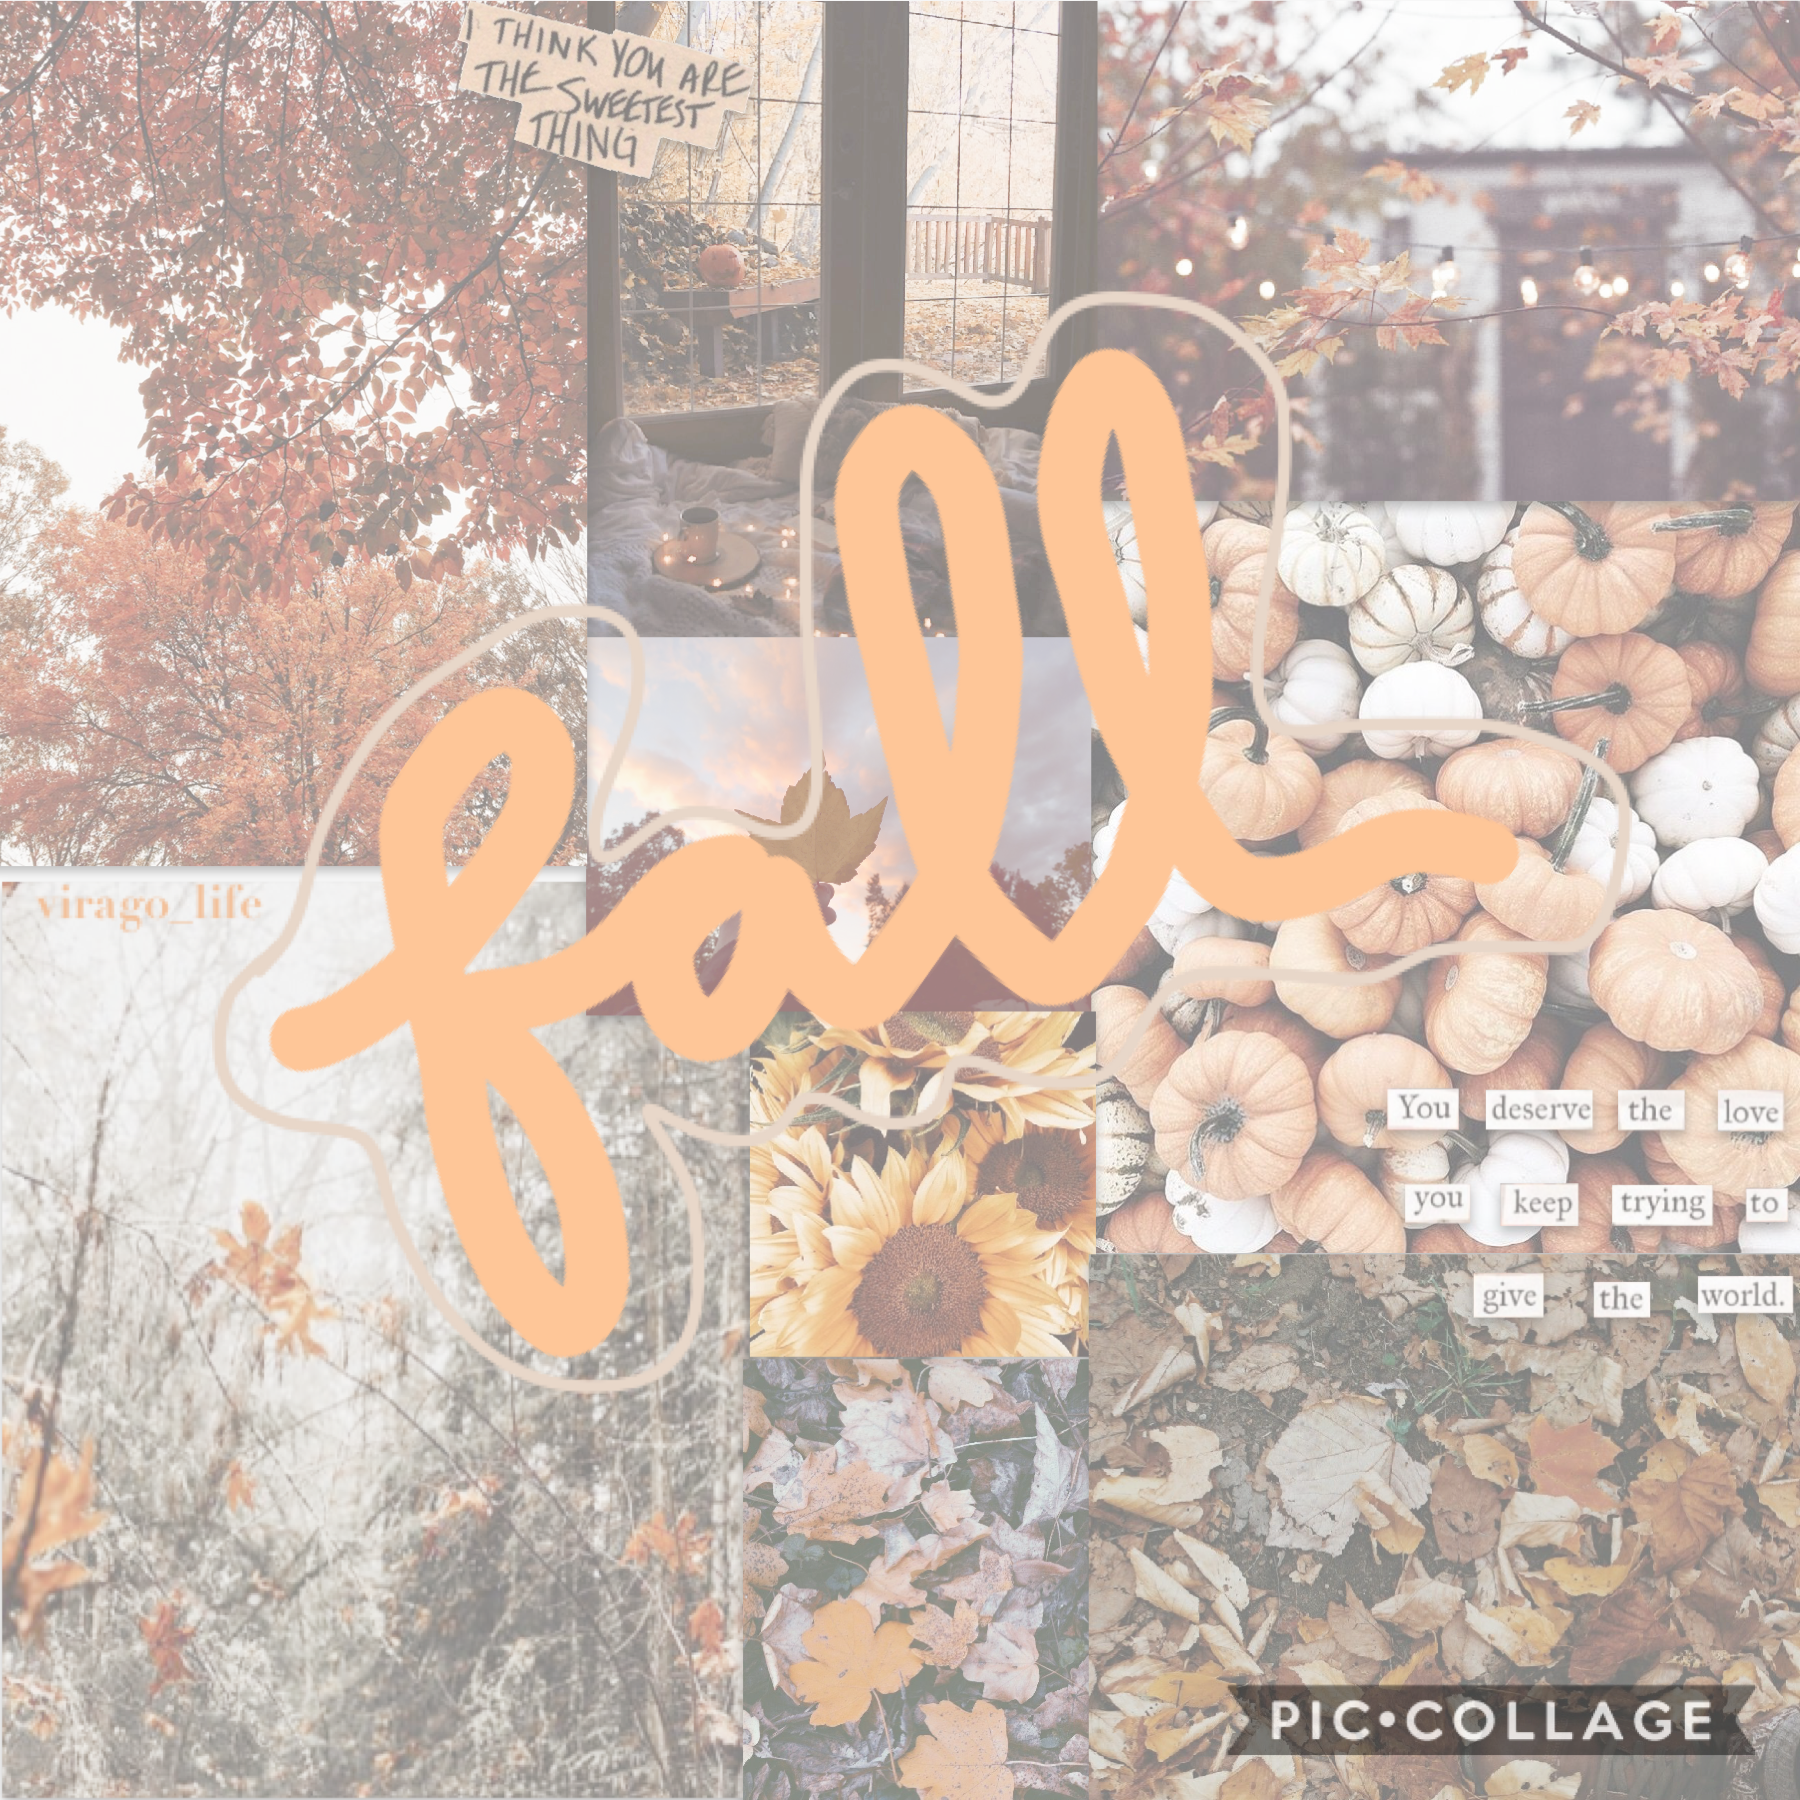 Tap🔥 Here’s a simpler collage! There was a bonfire last night, and how I’m in SUCH A FALL MOOD. I can’t wait until the next bonfire🥰Qotd: Favorite season?
Aotd:Fall love the colors and the weather! Winter is amazing too